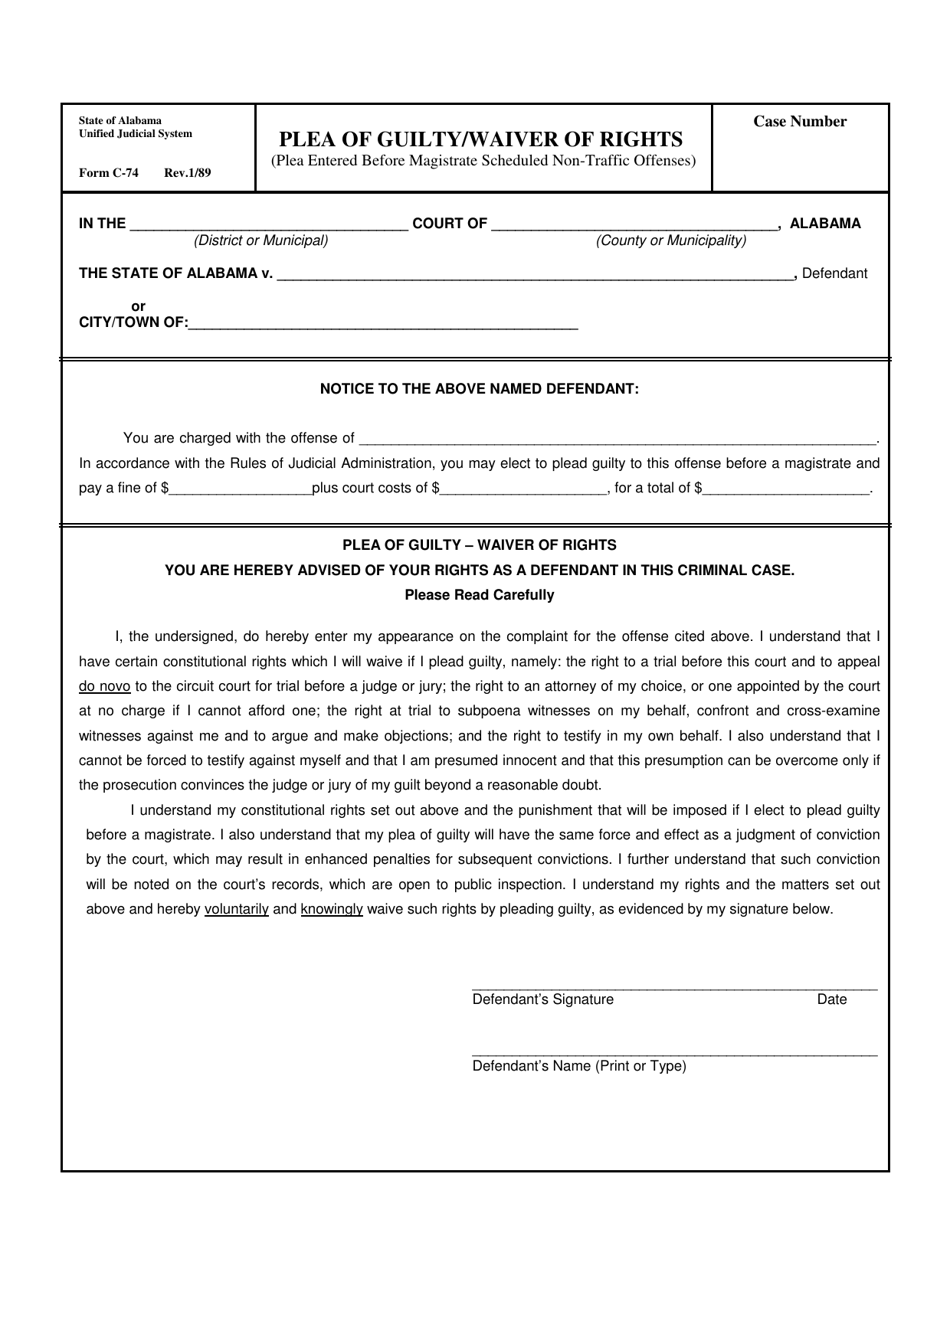 Form C-74 Plea of Guilty / Waiver of Rights - Alabama, Page 1